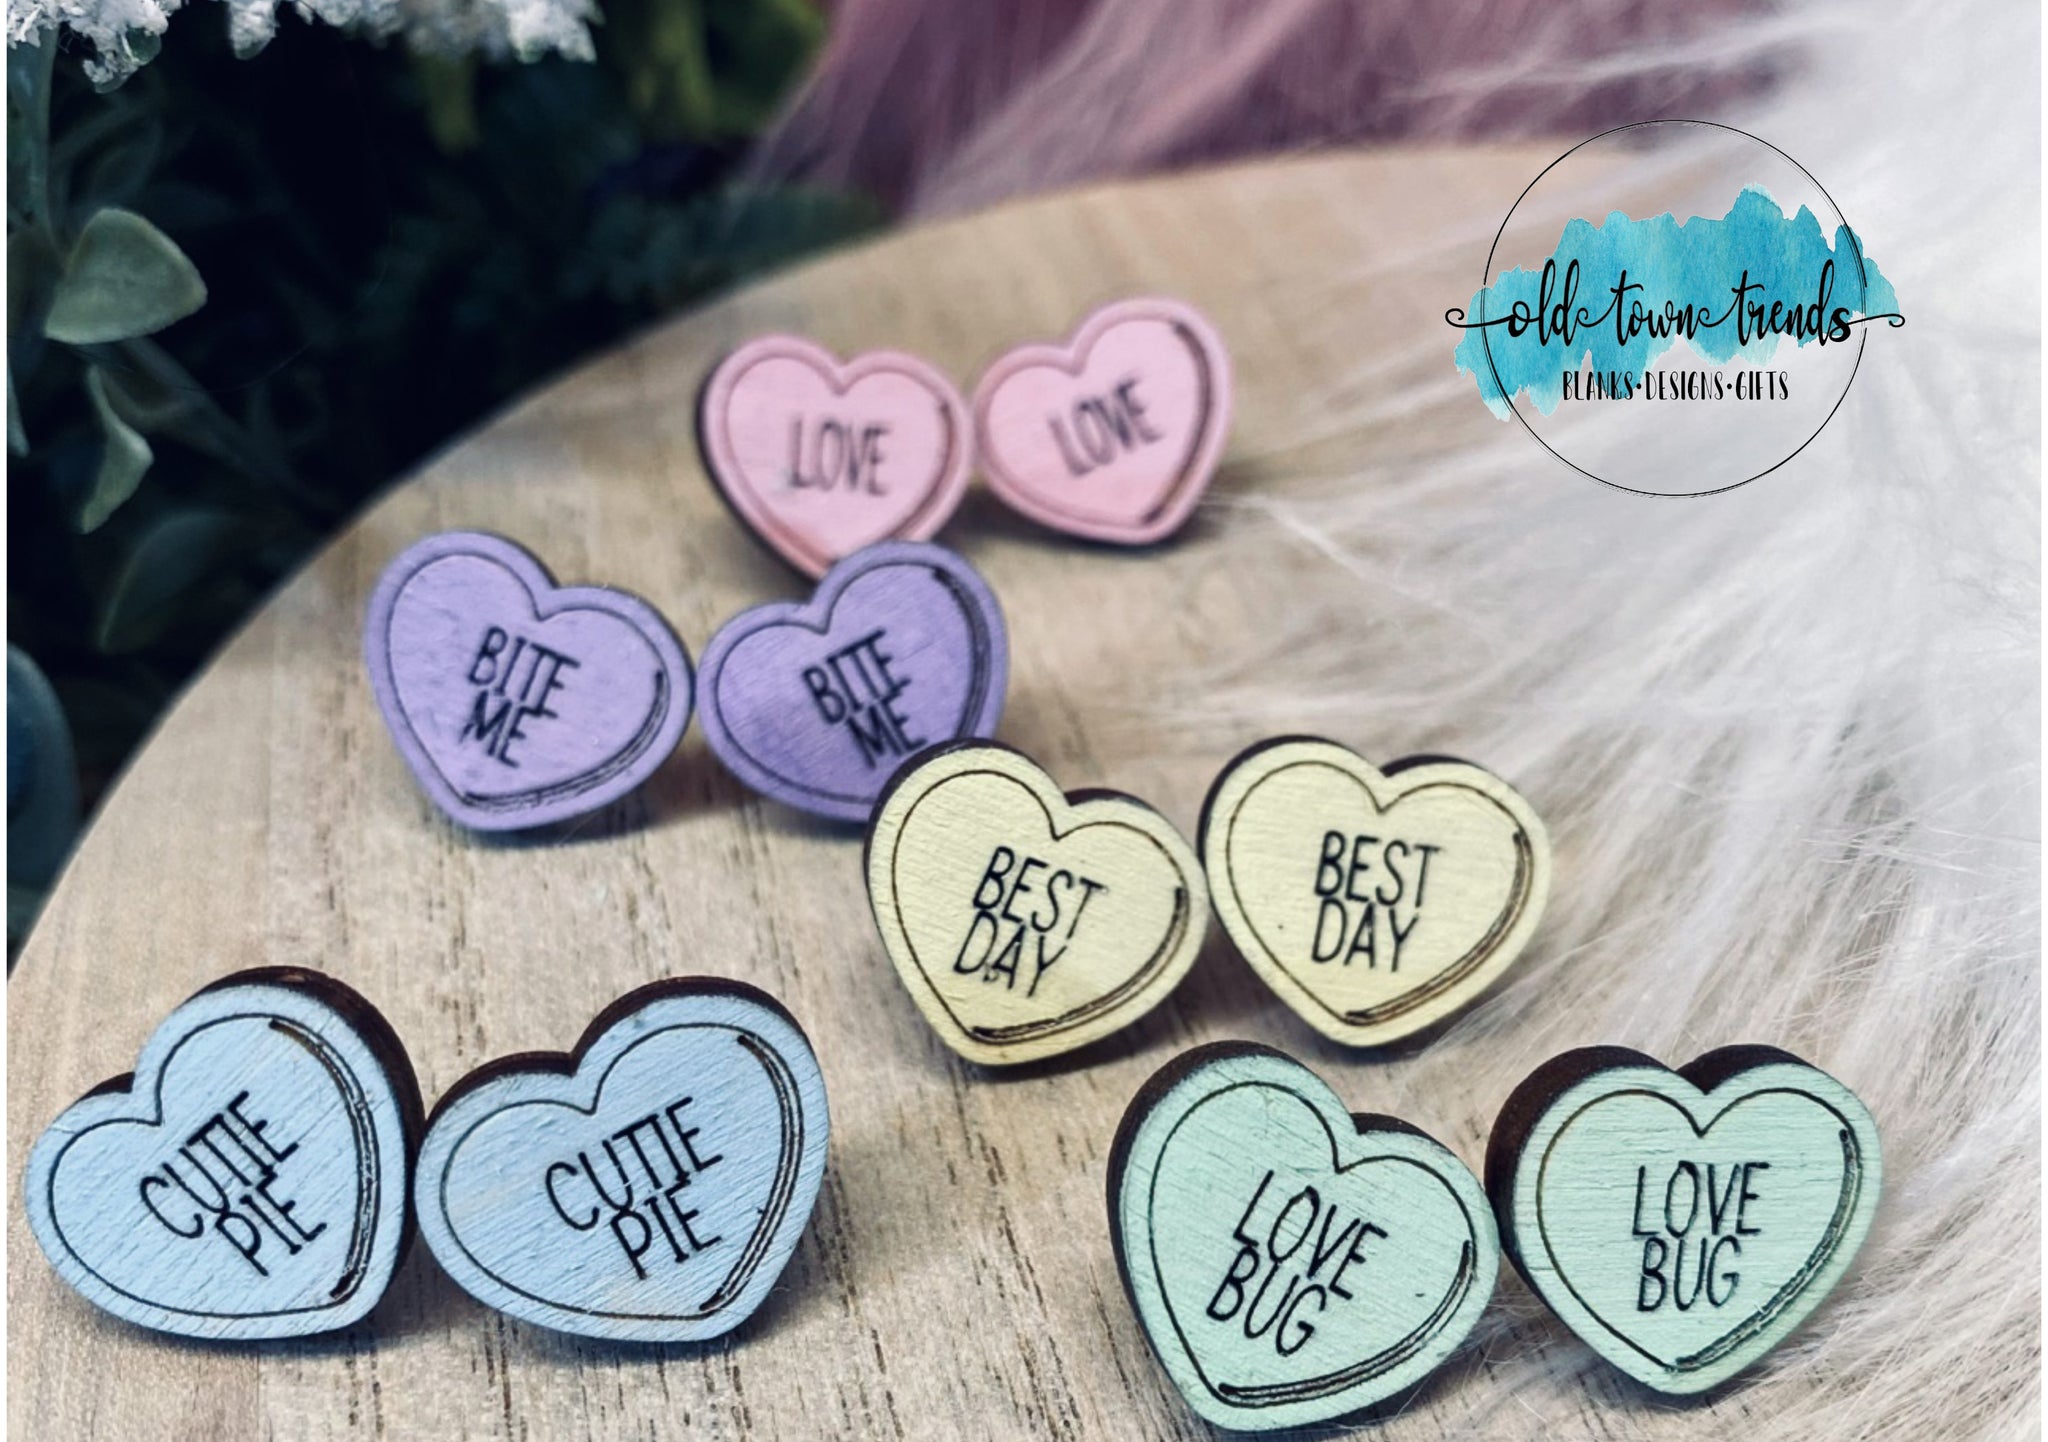 Conversation heart earring stud - Valentines day gift